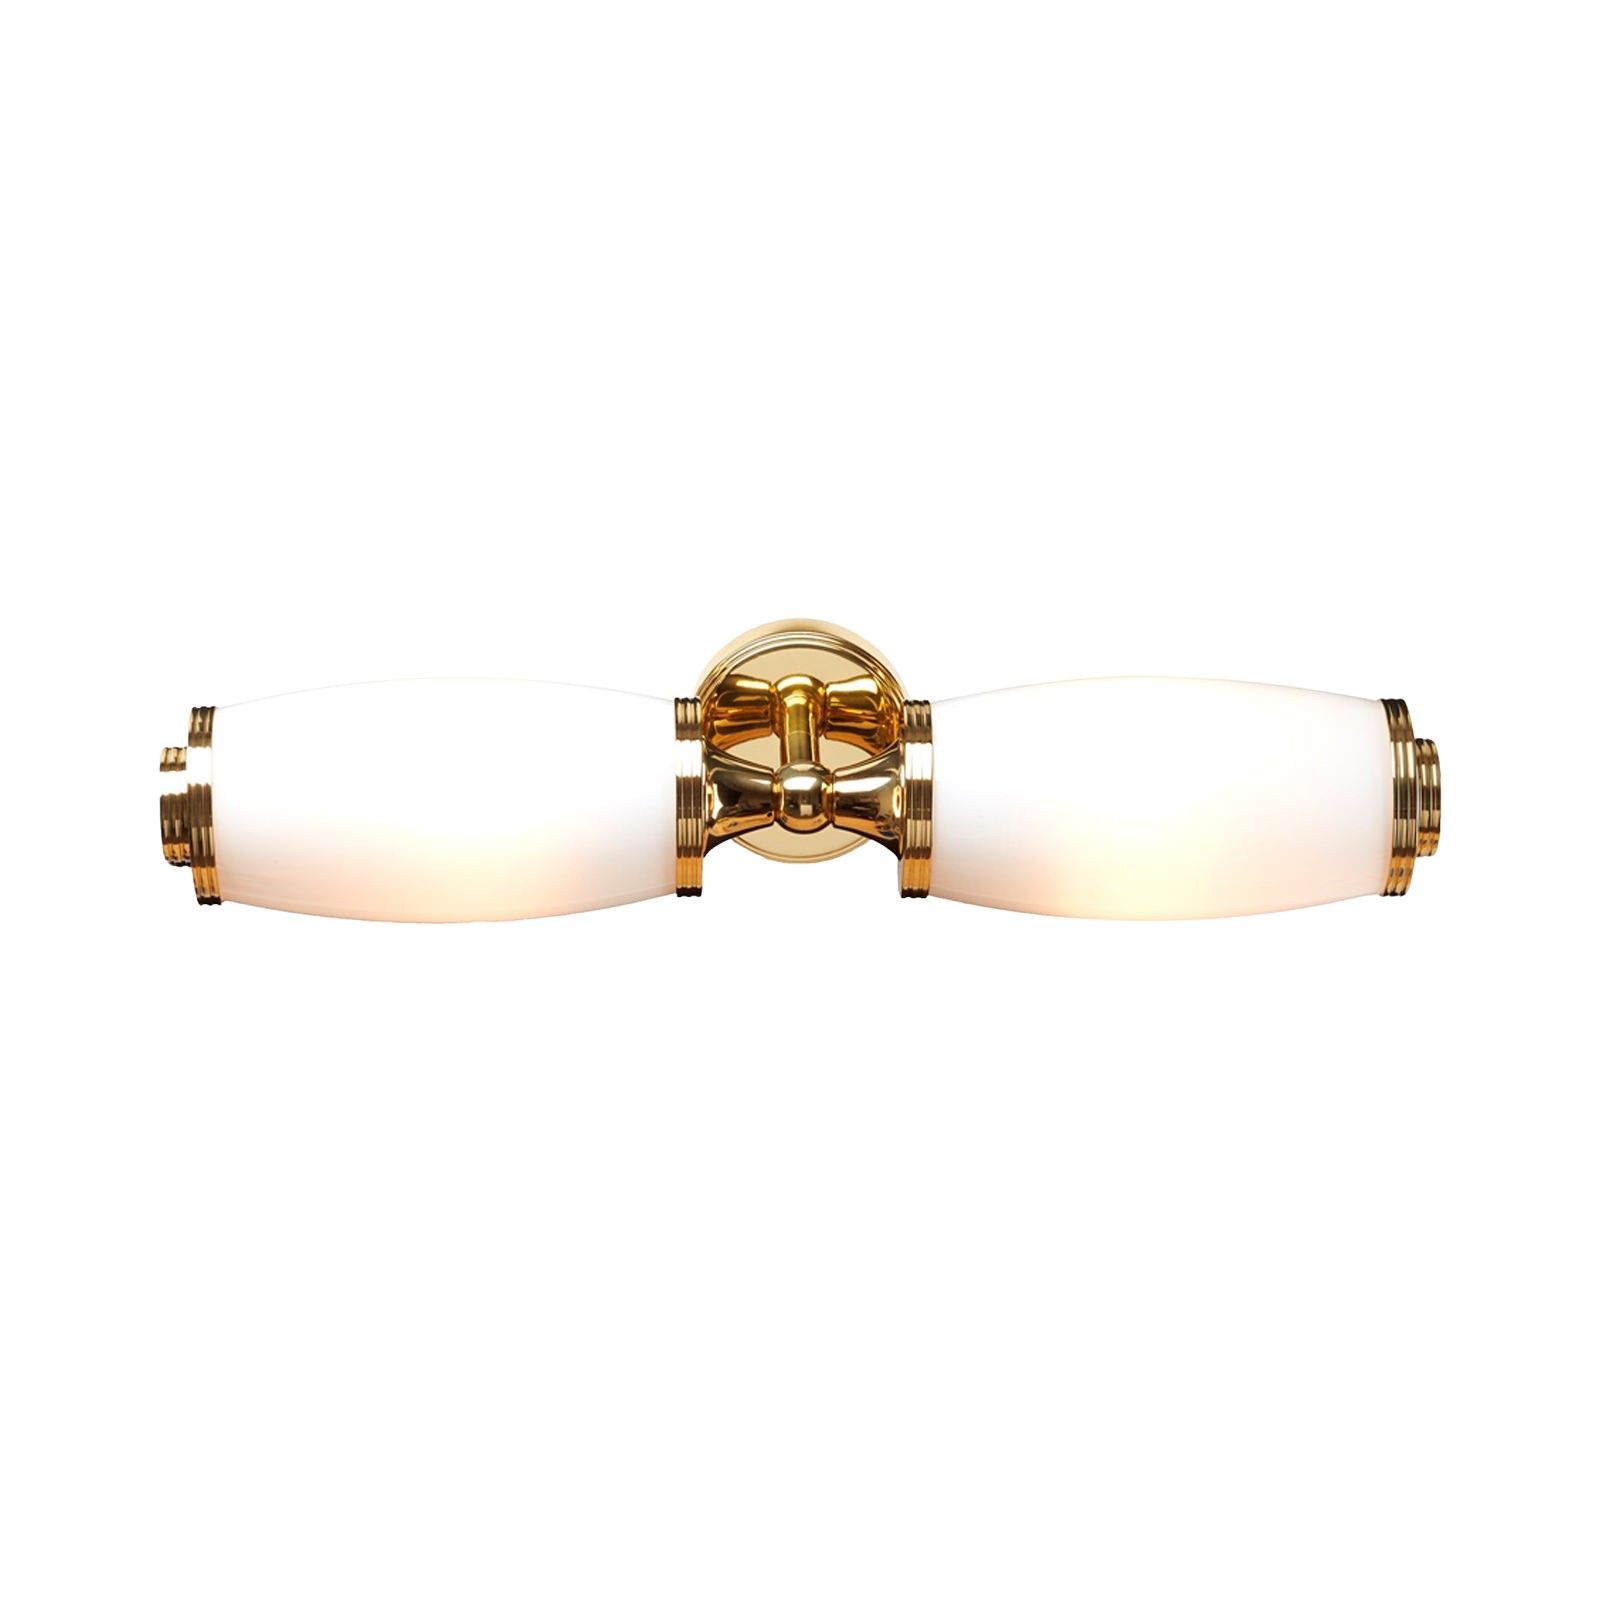 Double bathroom wall light in solid brass